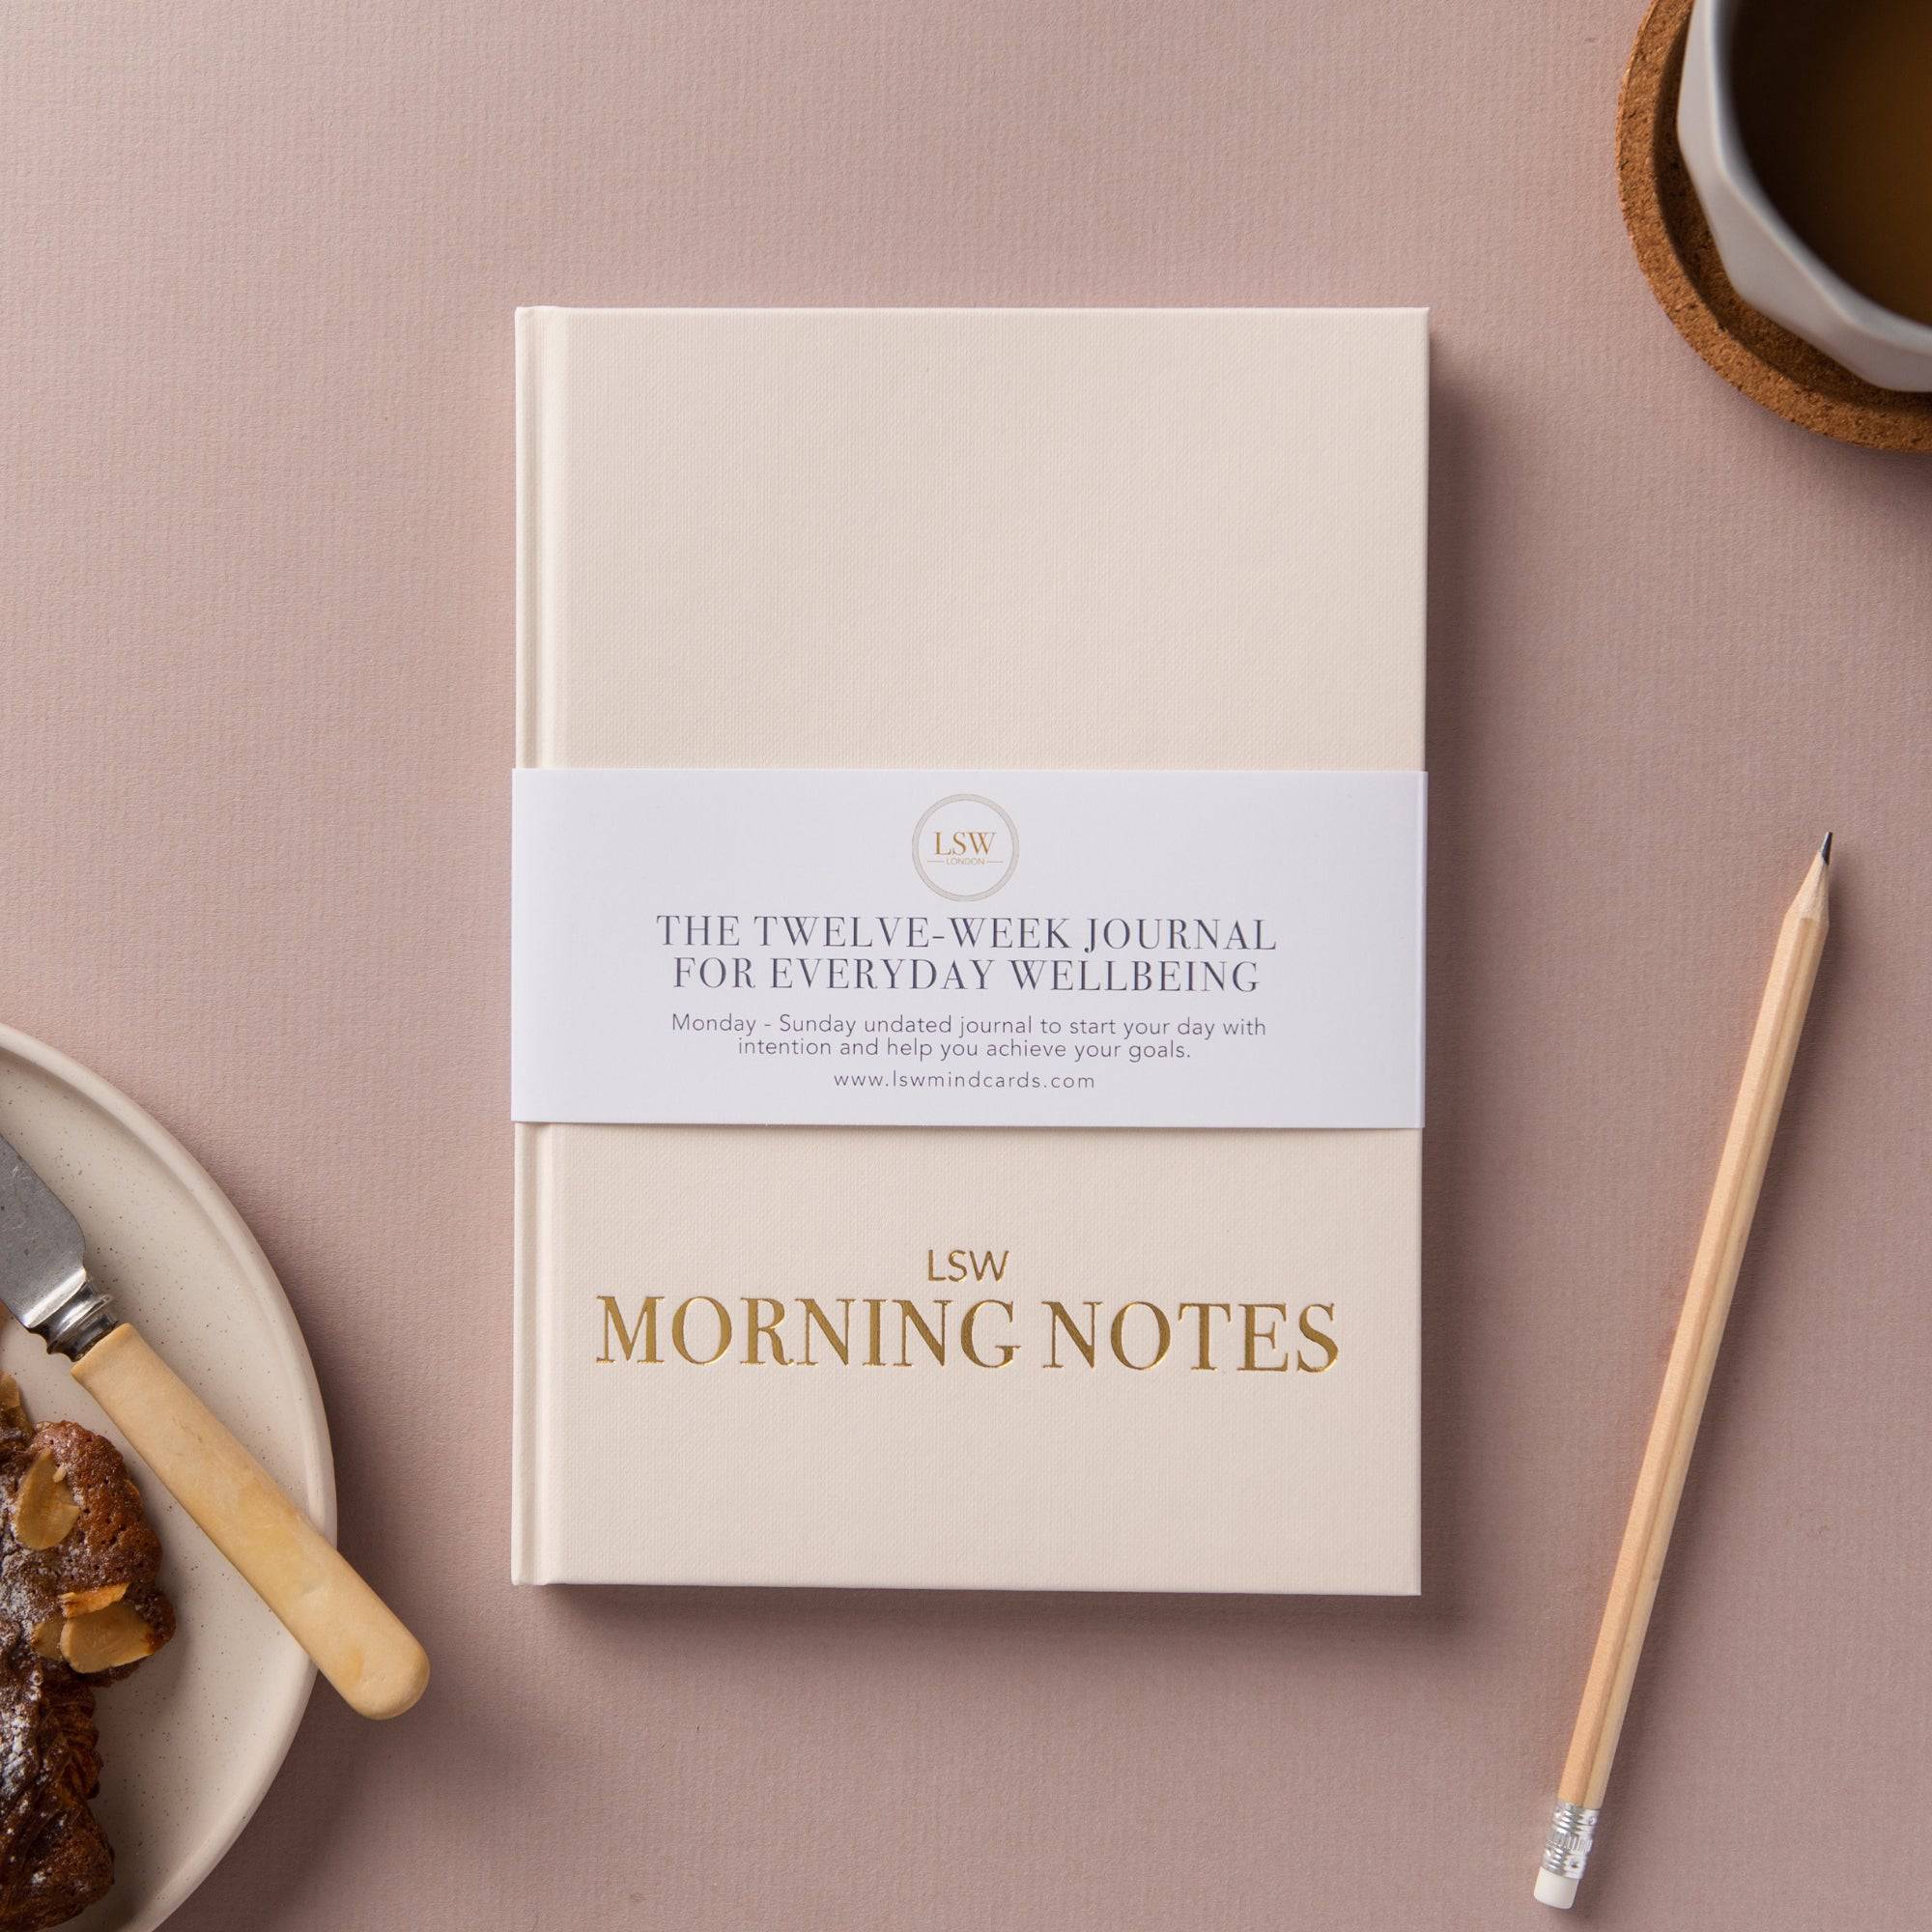 Morning Notes - THAT COOL LIVING